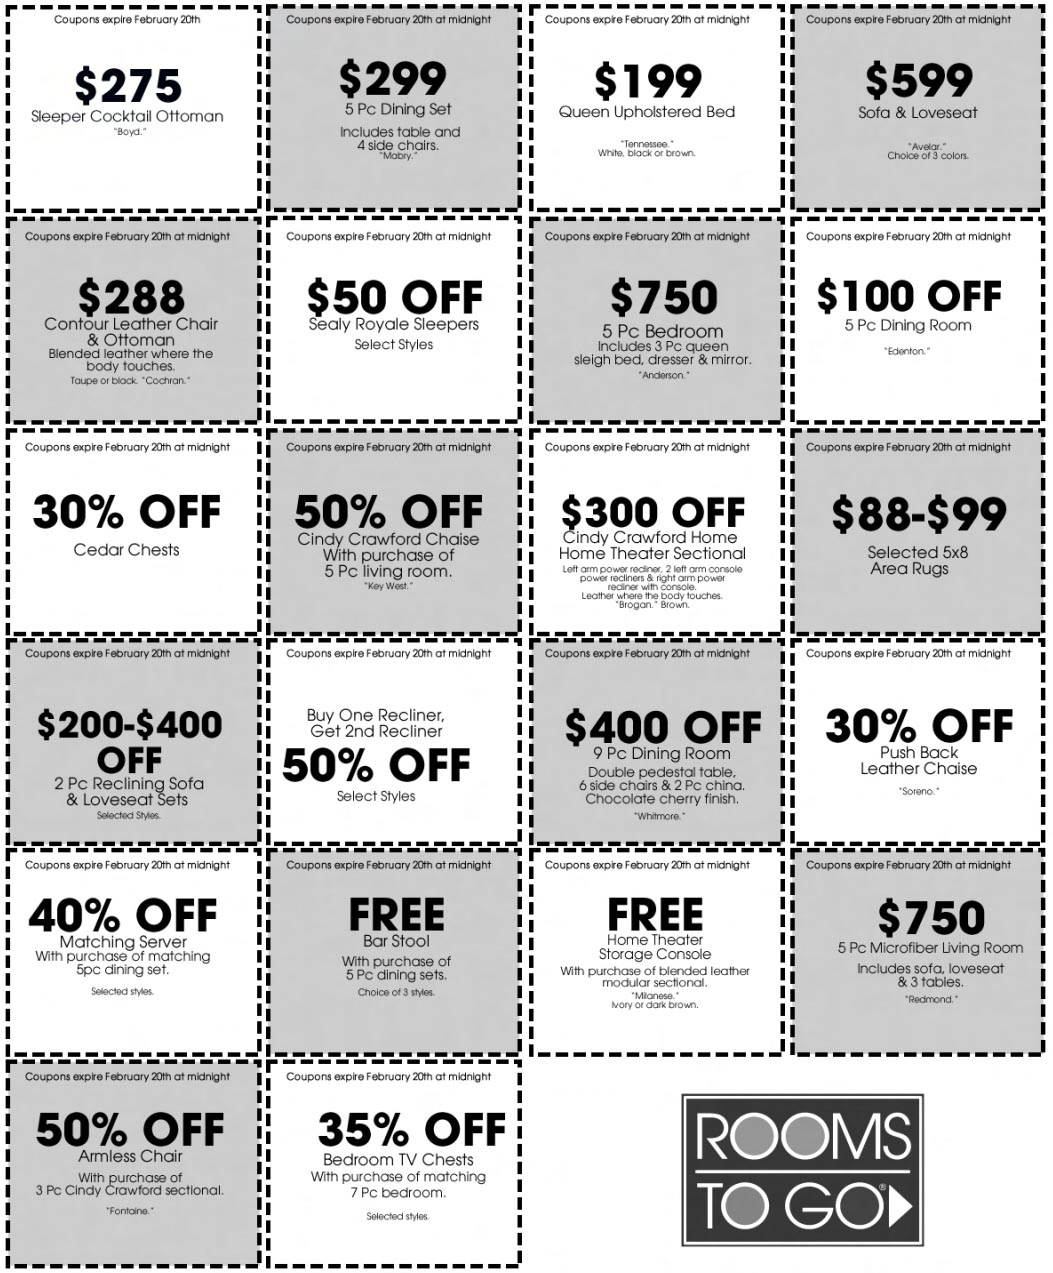 Rooms To Go: 20+ Printable Coupons